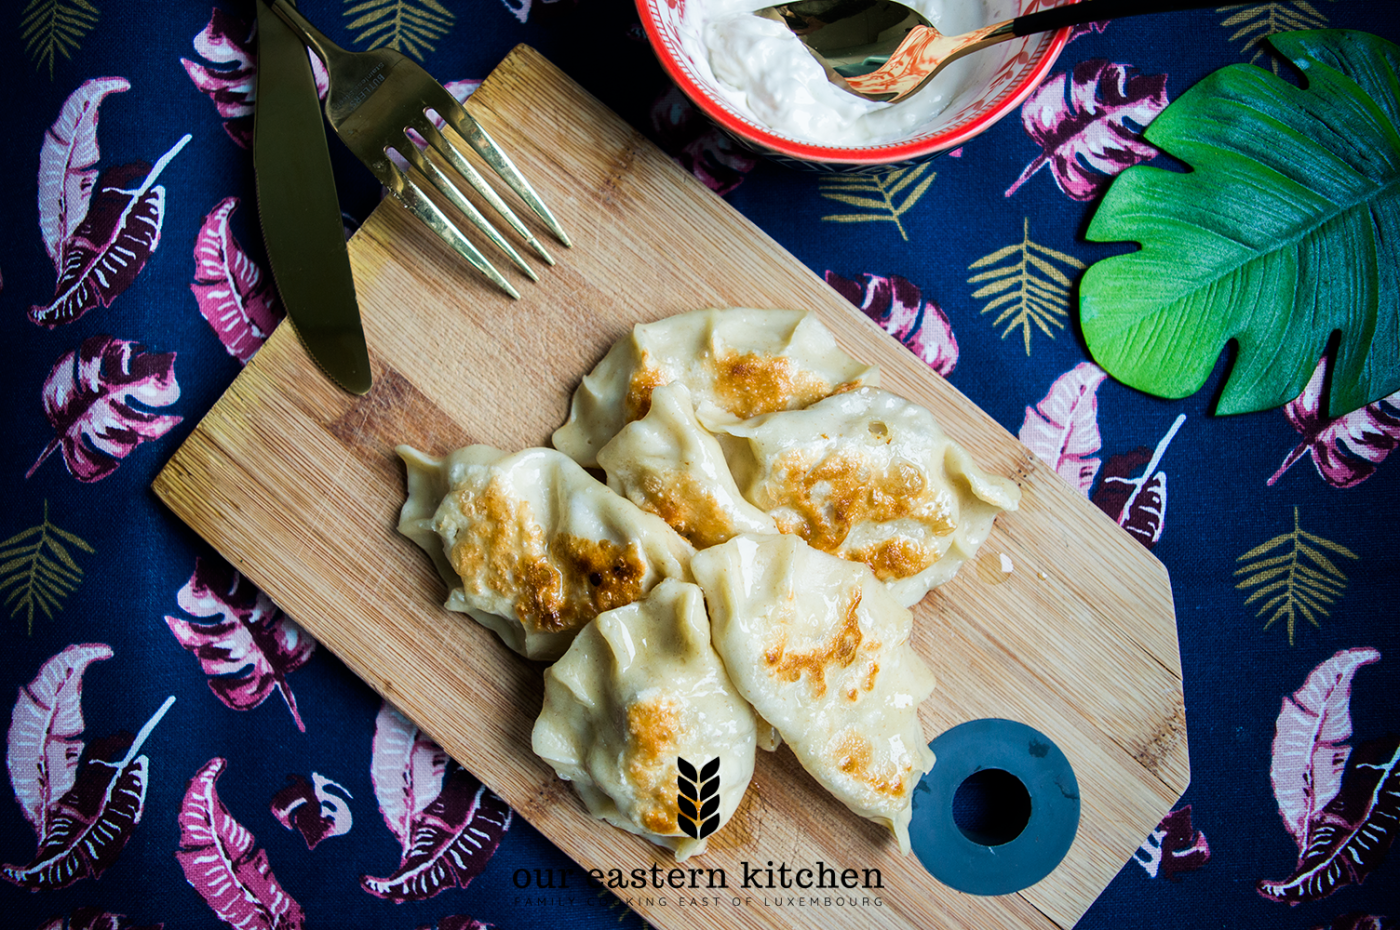 Our Eastern Kitchen - Delicious Pierogi with Cottage Cheese - Recipe - Food Photography